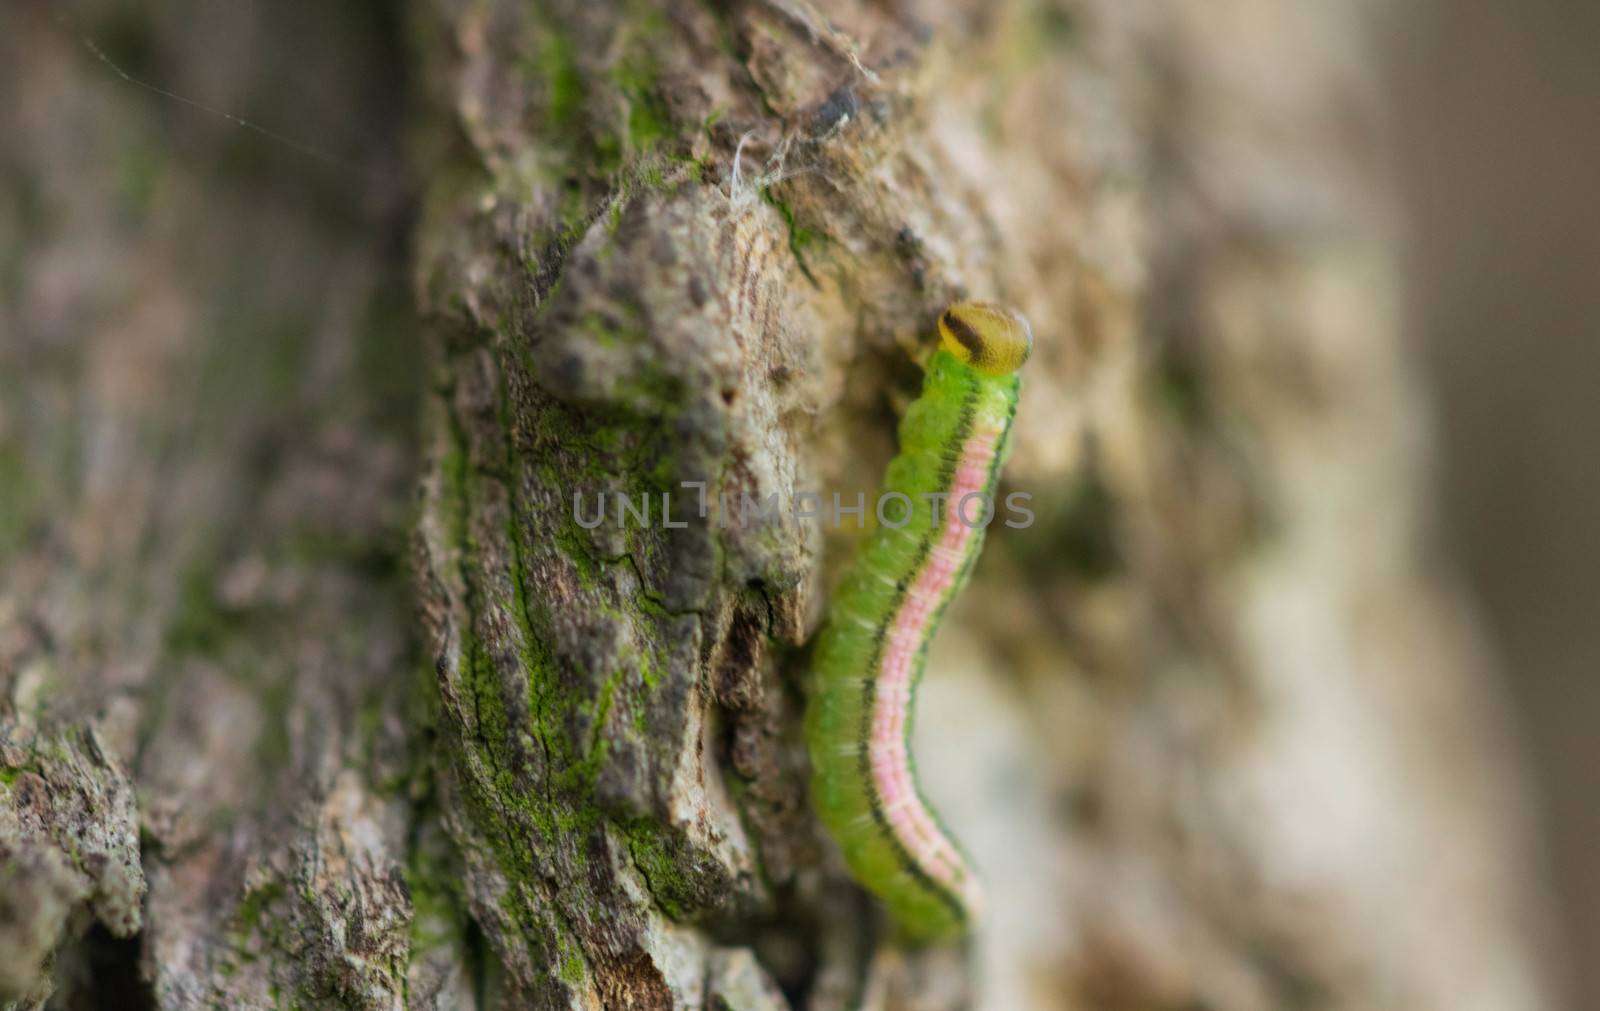 The worm, caterpillar, a worm on a tree, macro shot.